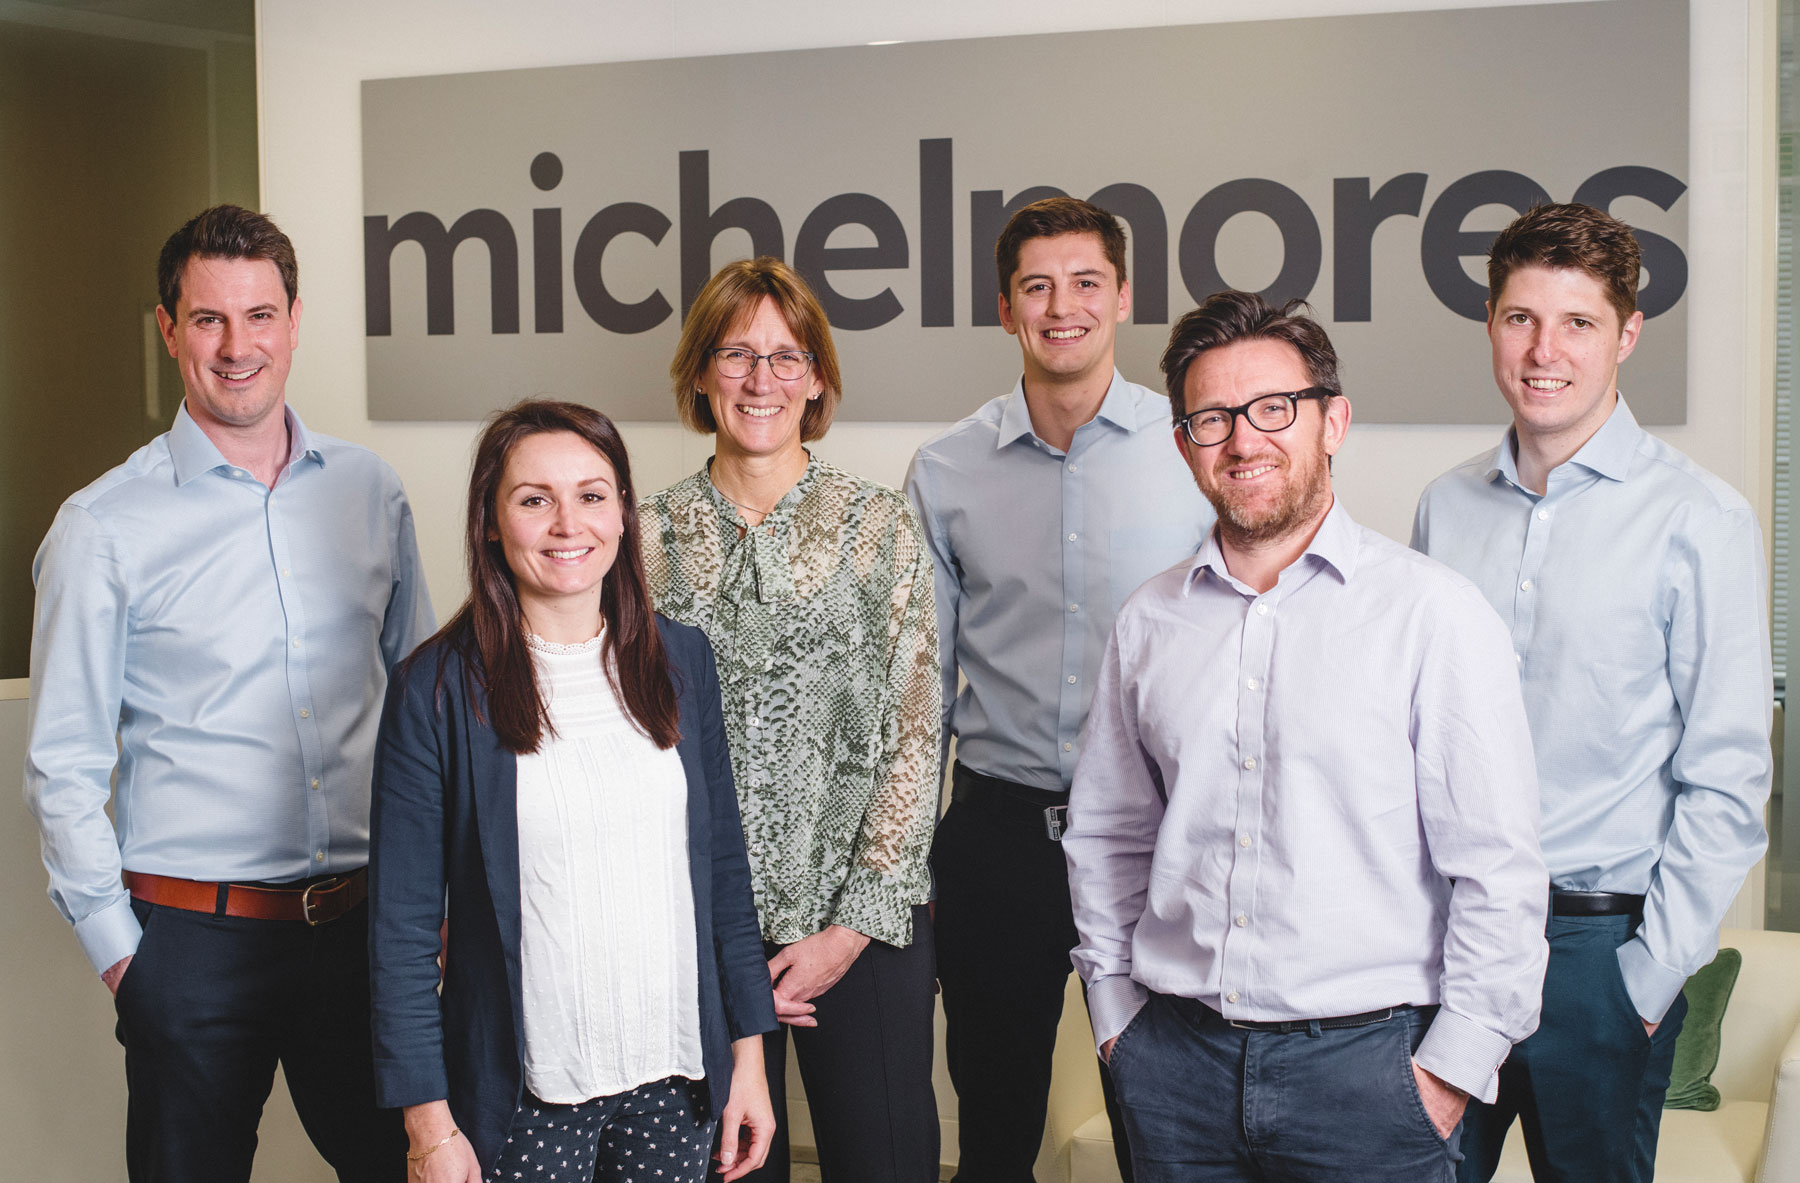 Michelmores continues to expand its Corporate team in the South West